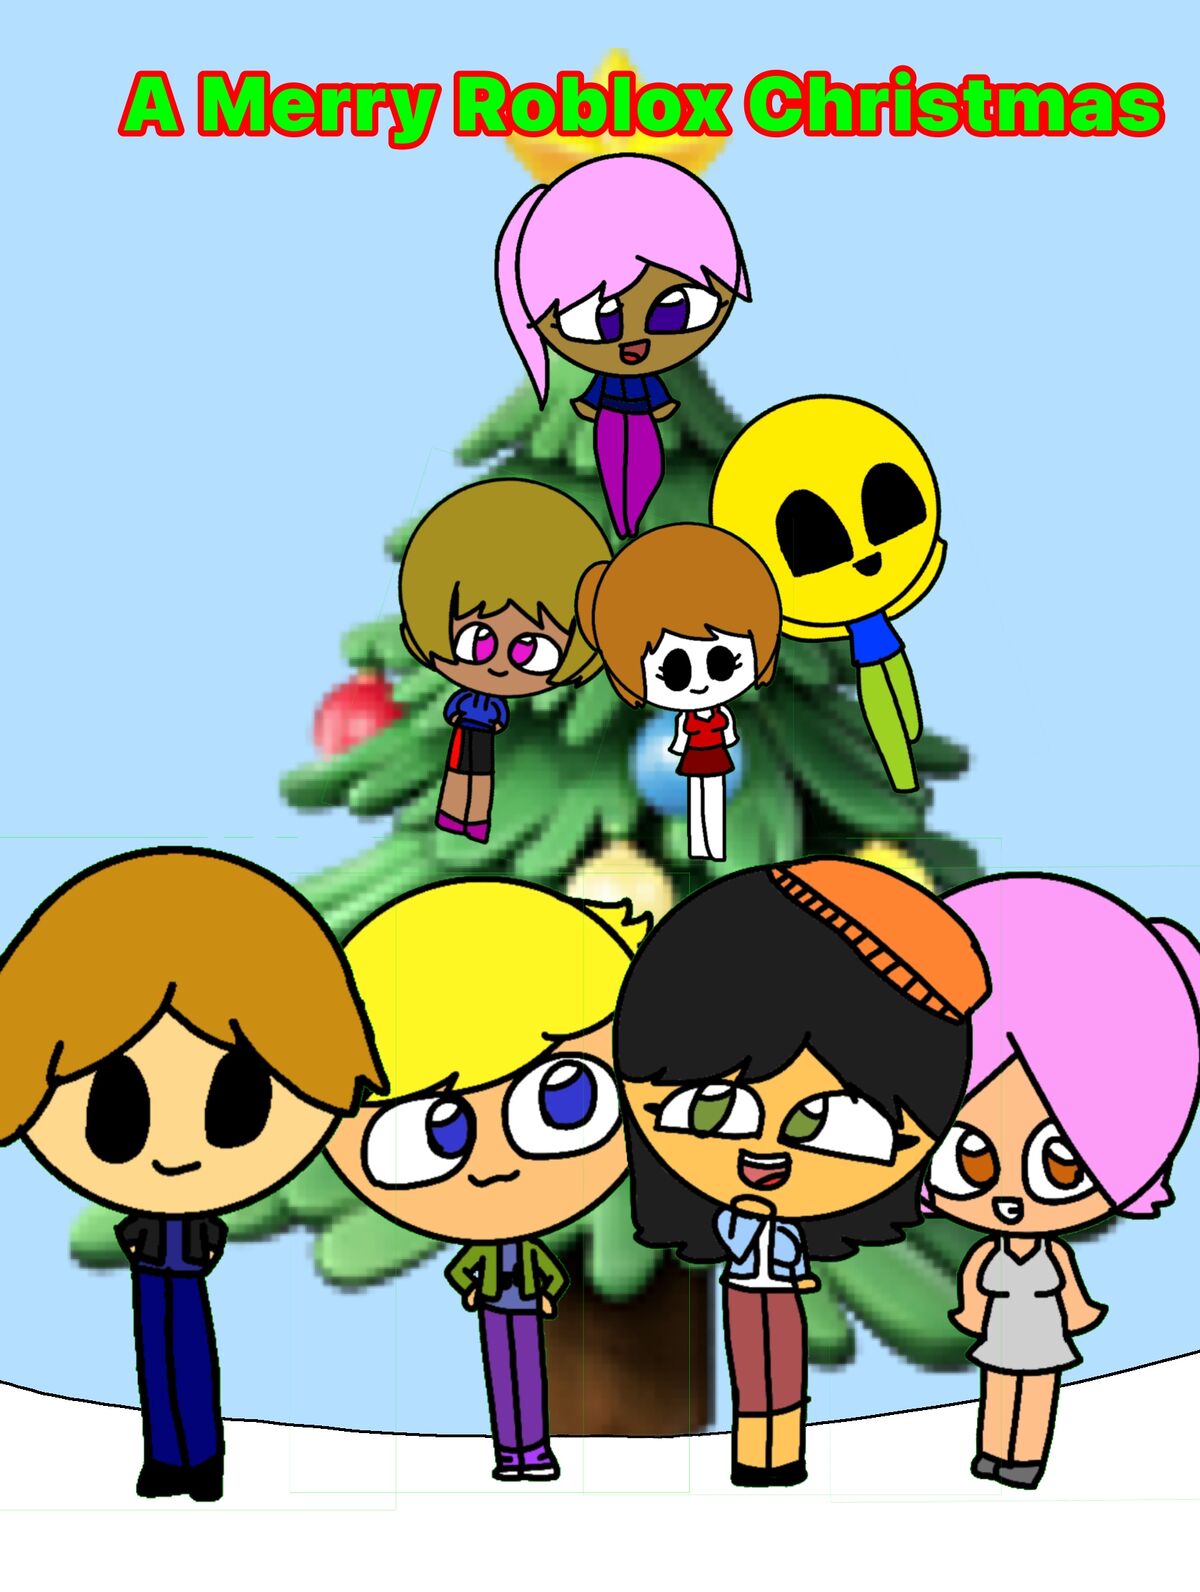 Merry Edvic Christmas on X: Funni lil bacon hair man #robloxart  #robloxartist  / X